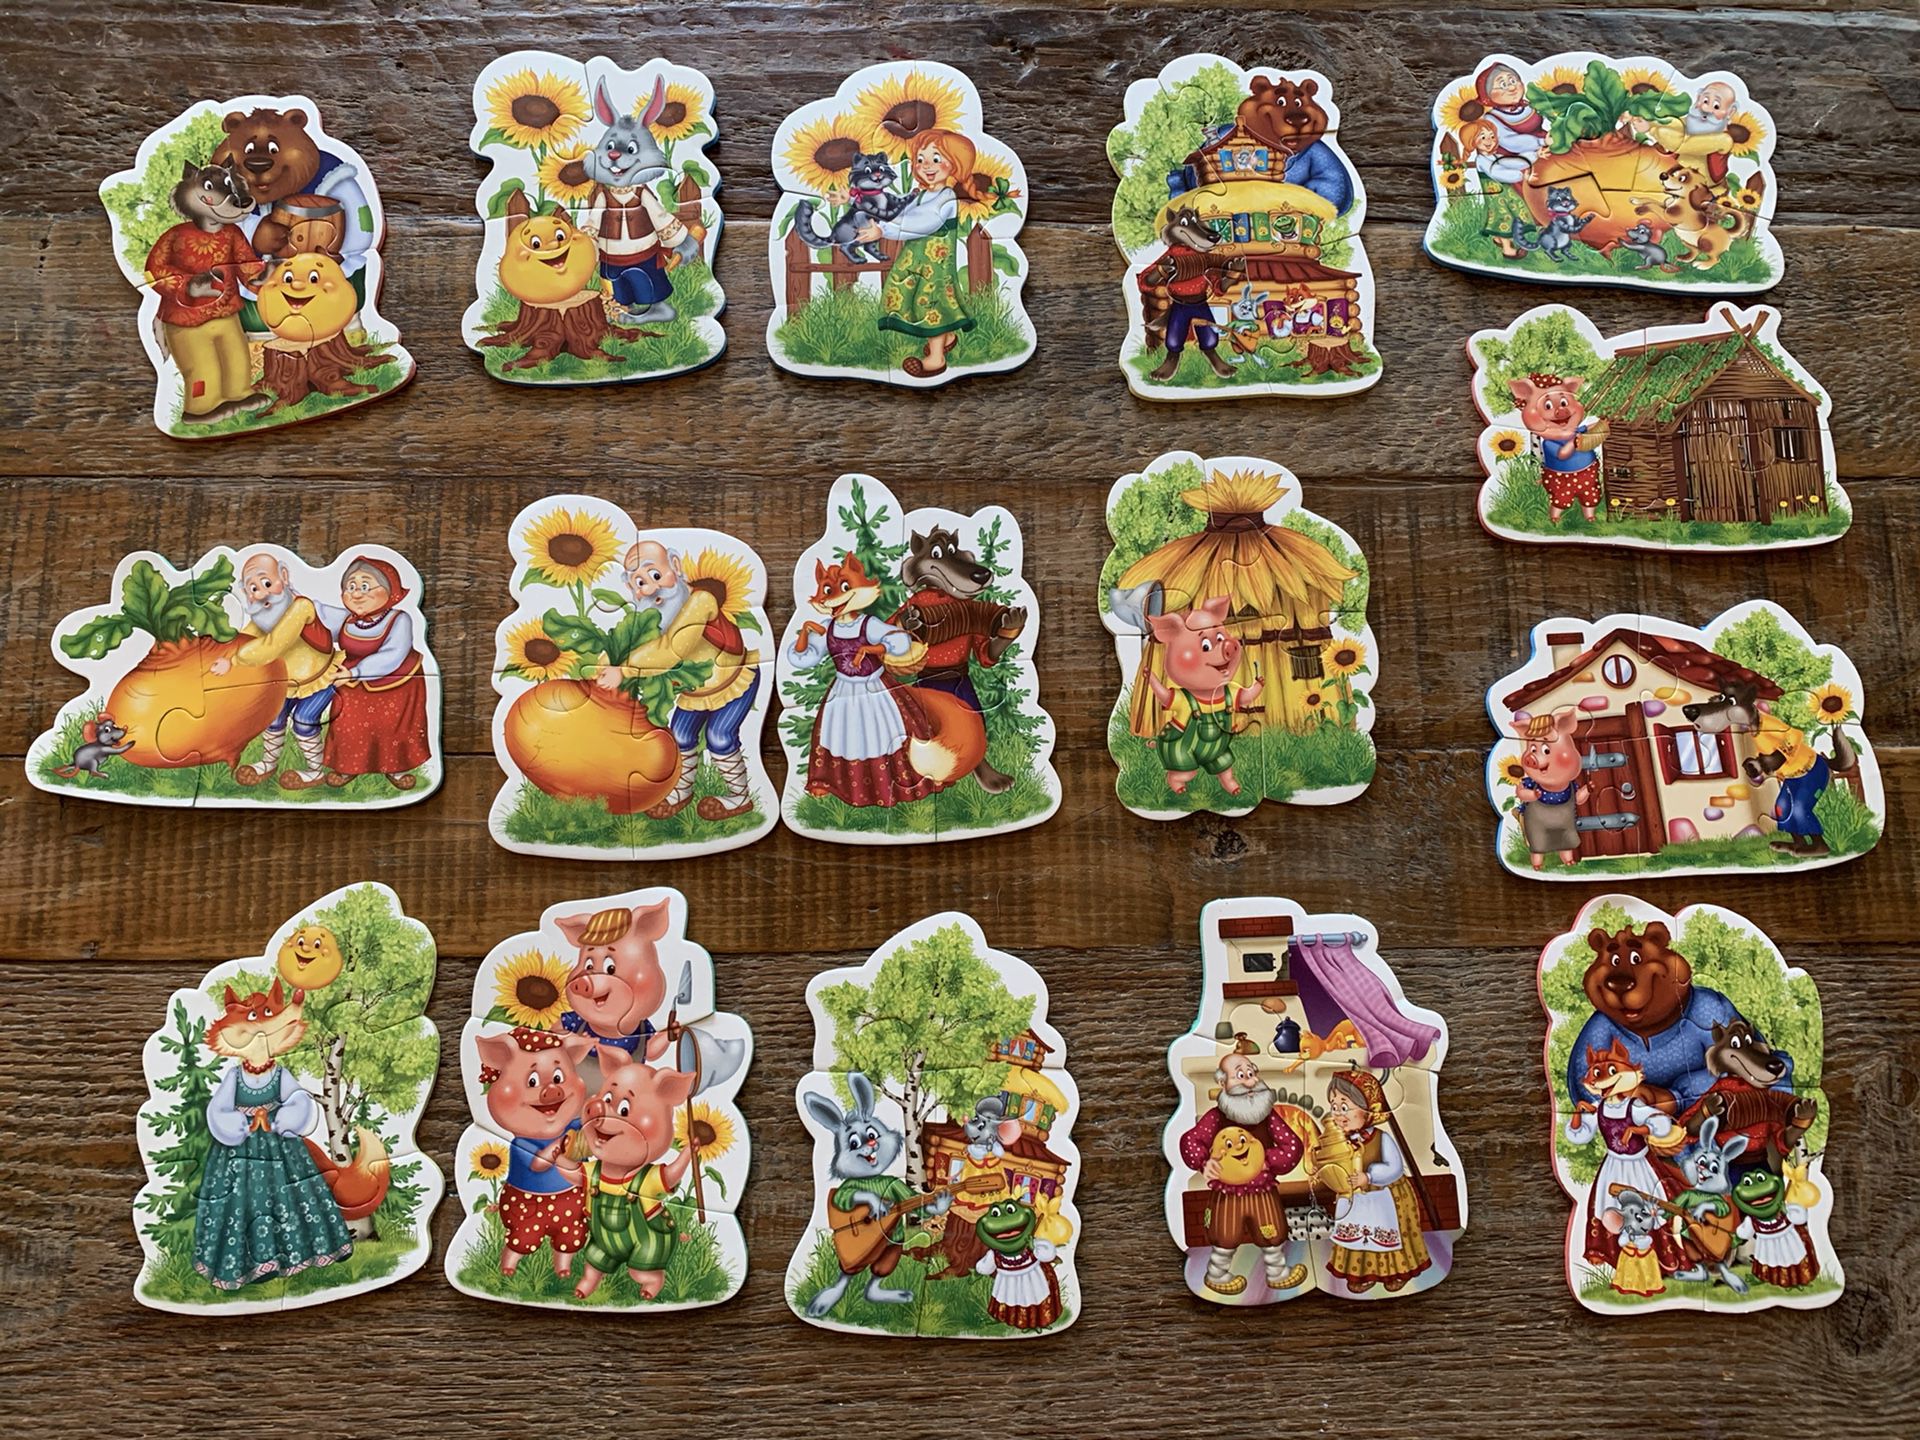 FREE Soft puzzles based on Russian folk tales.